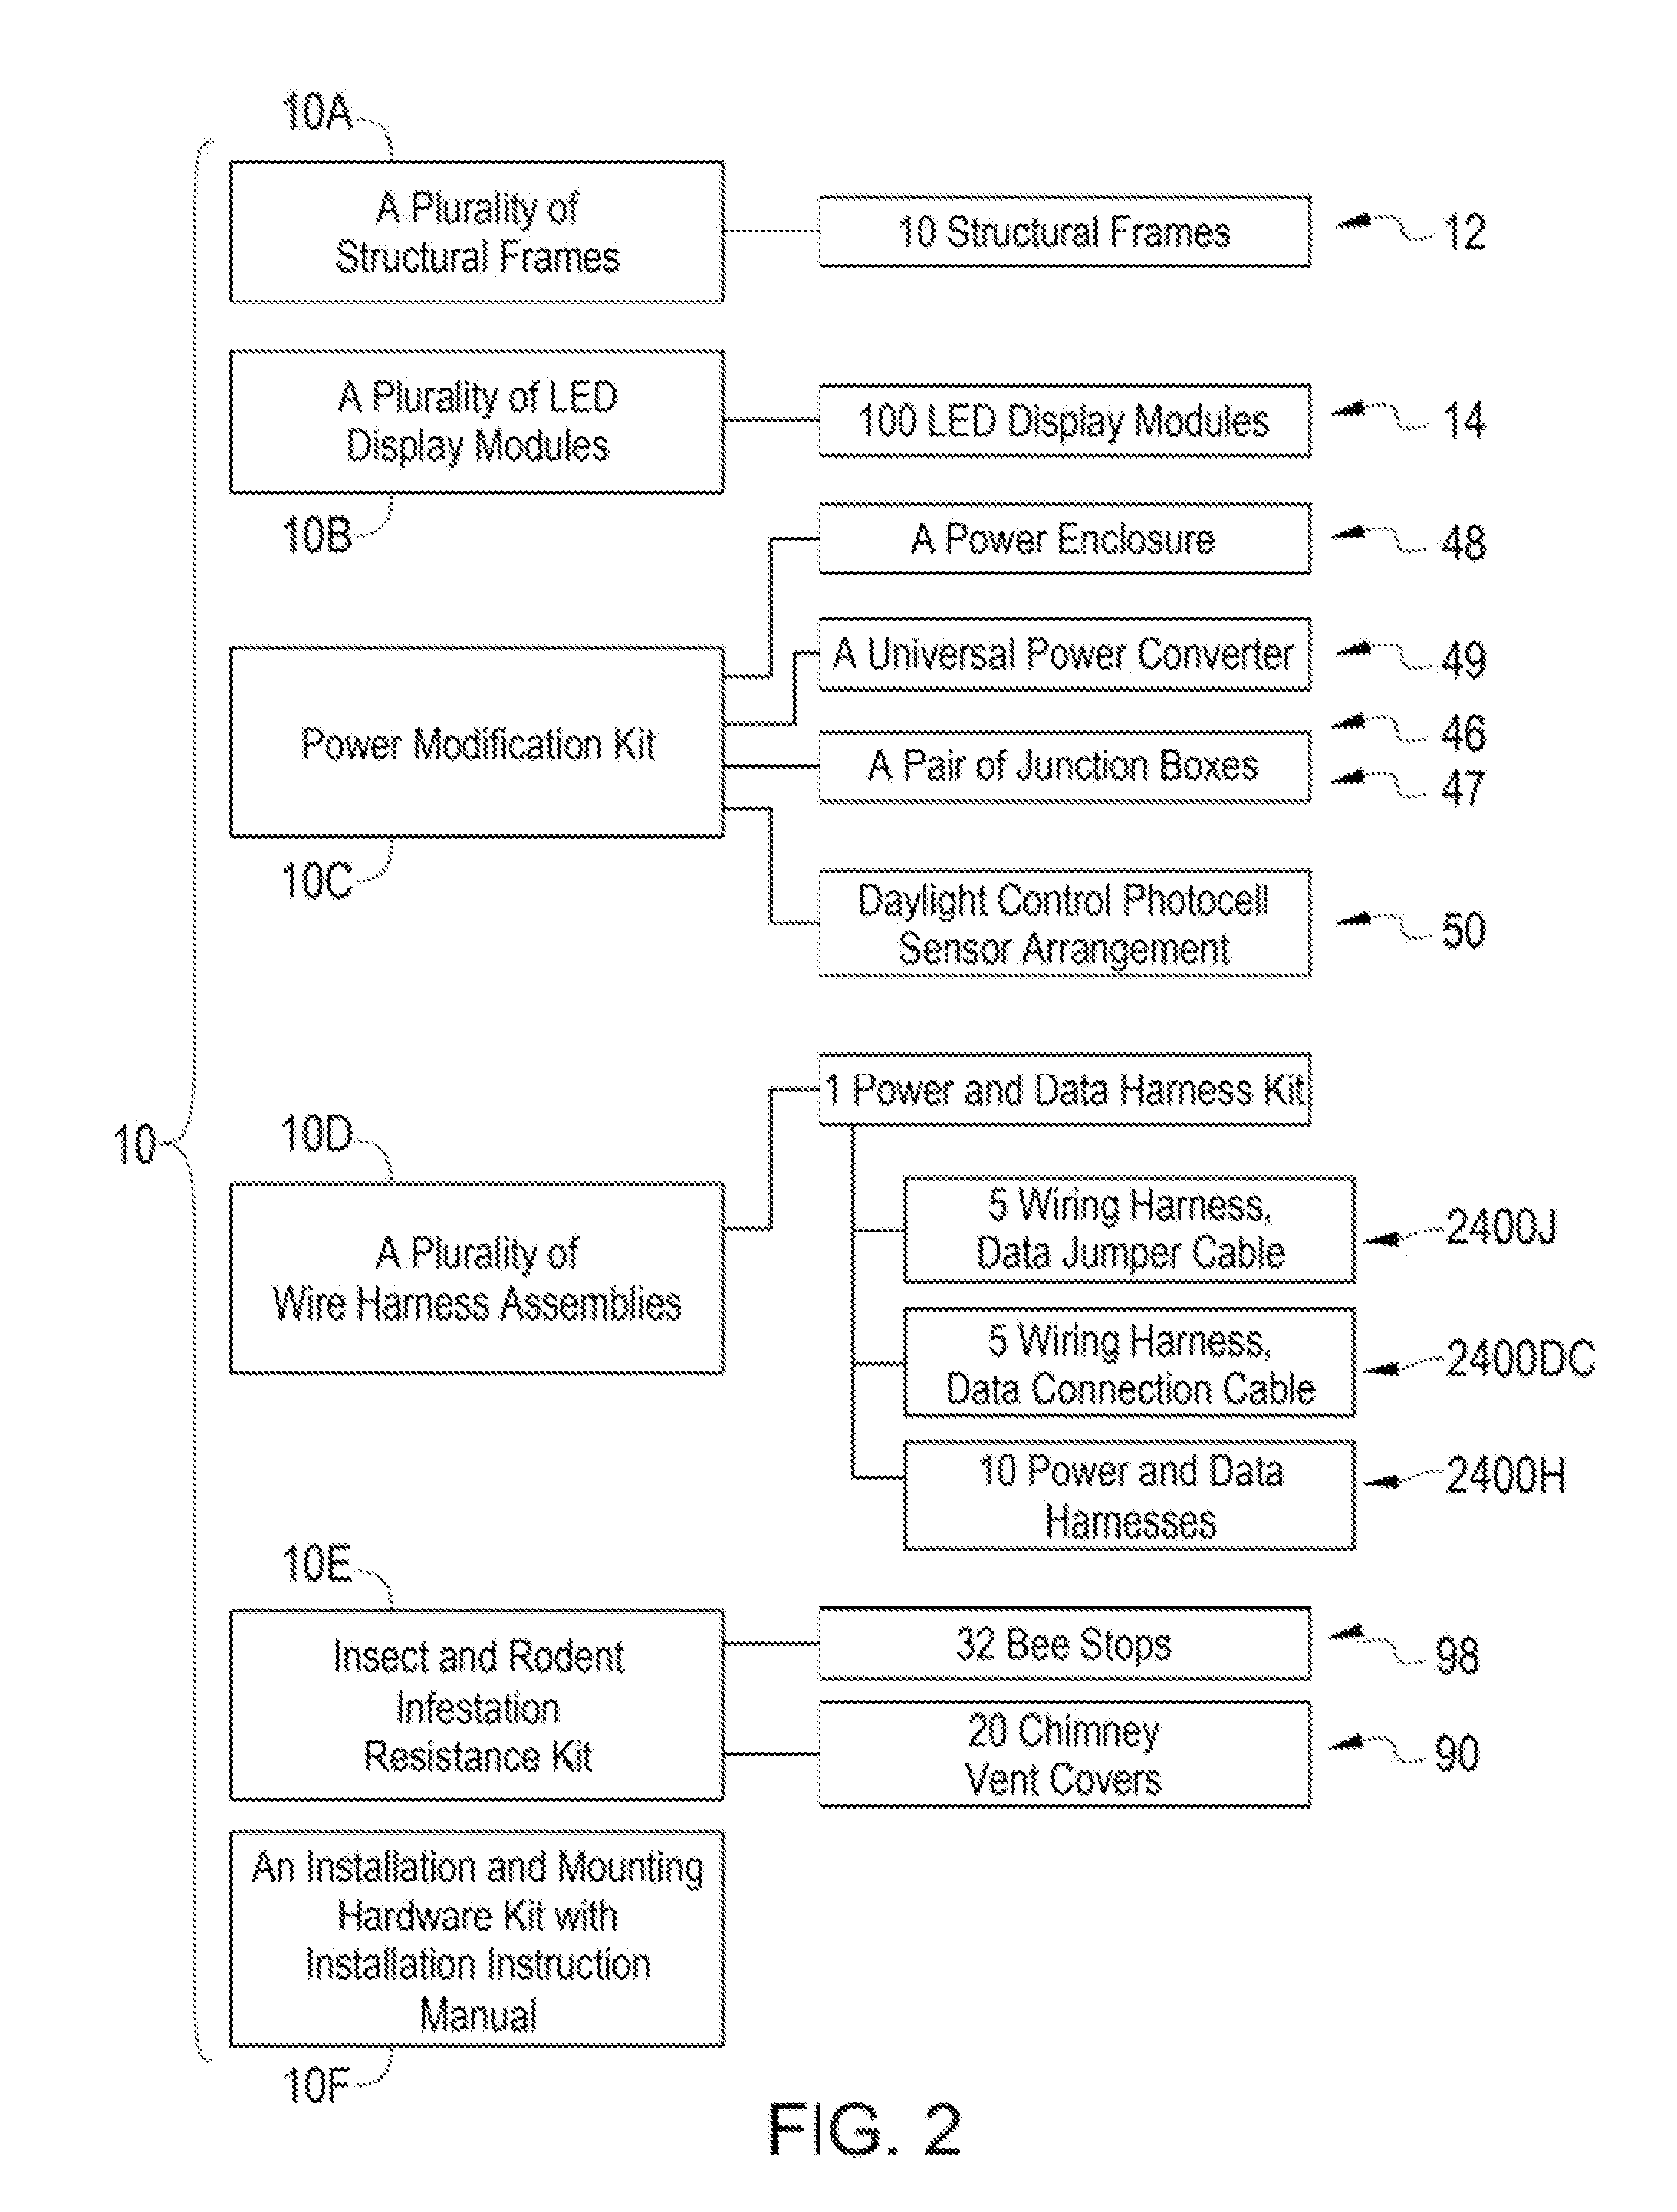 Modular wire harness arrangements and methods of using same for backside to frontside power and data distribution safety schemes